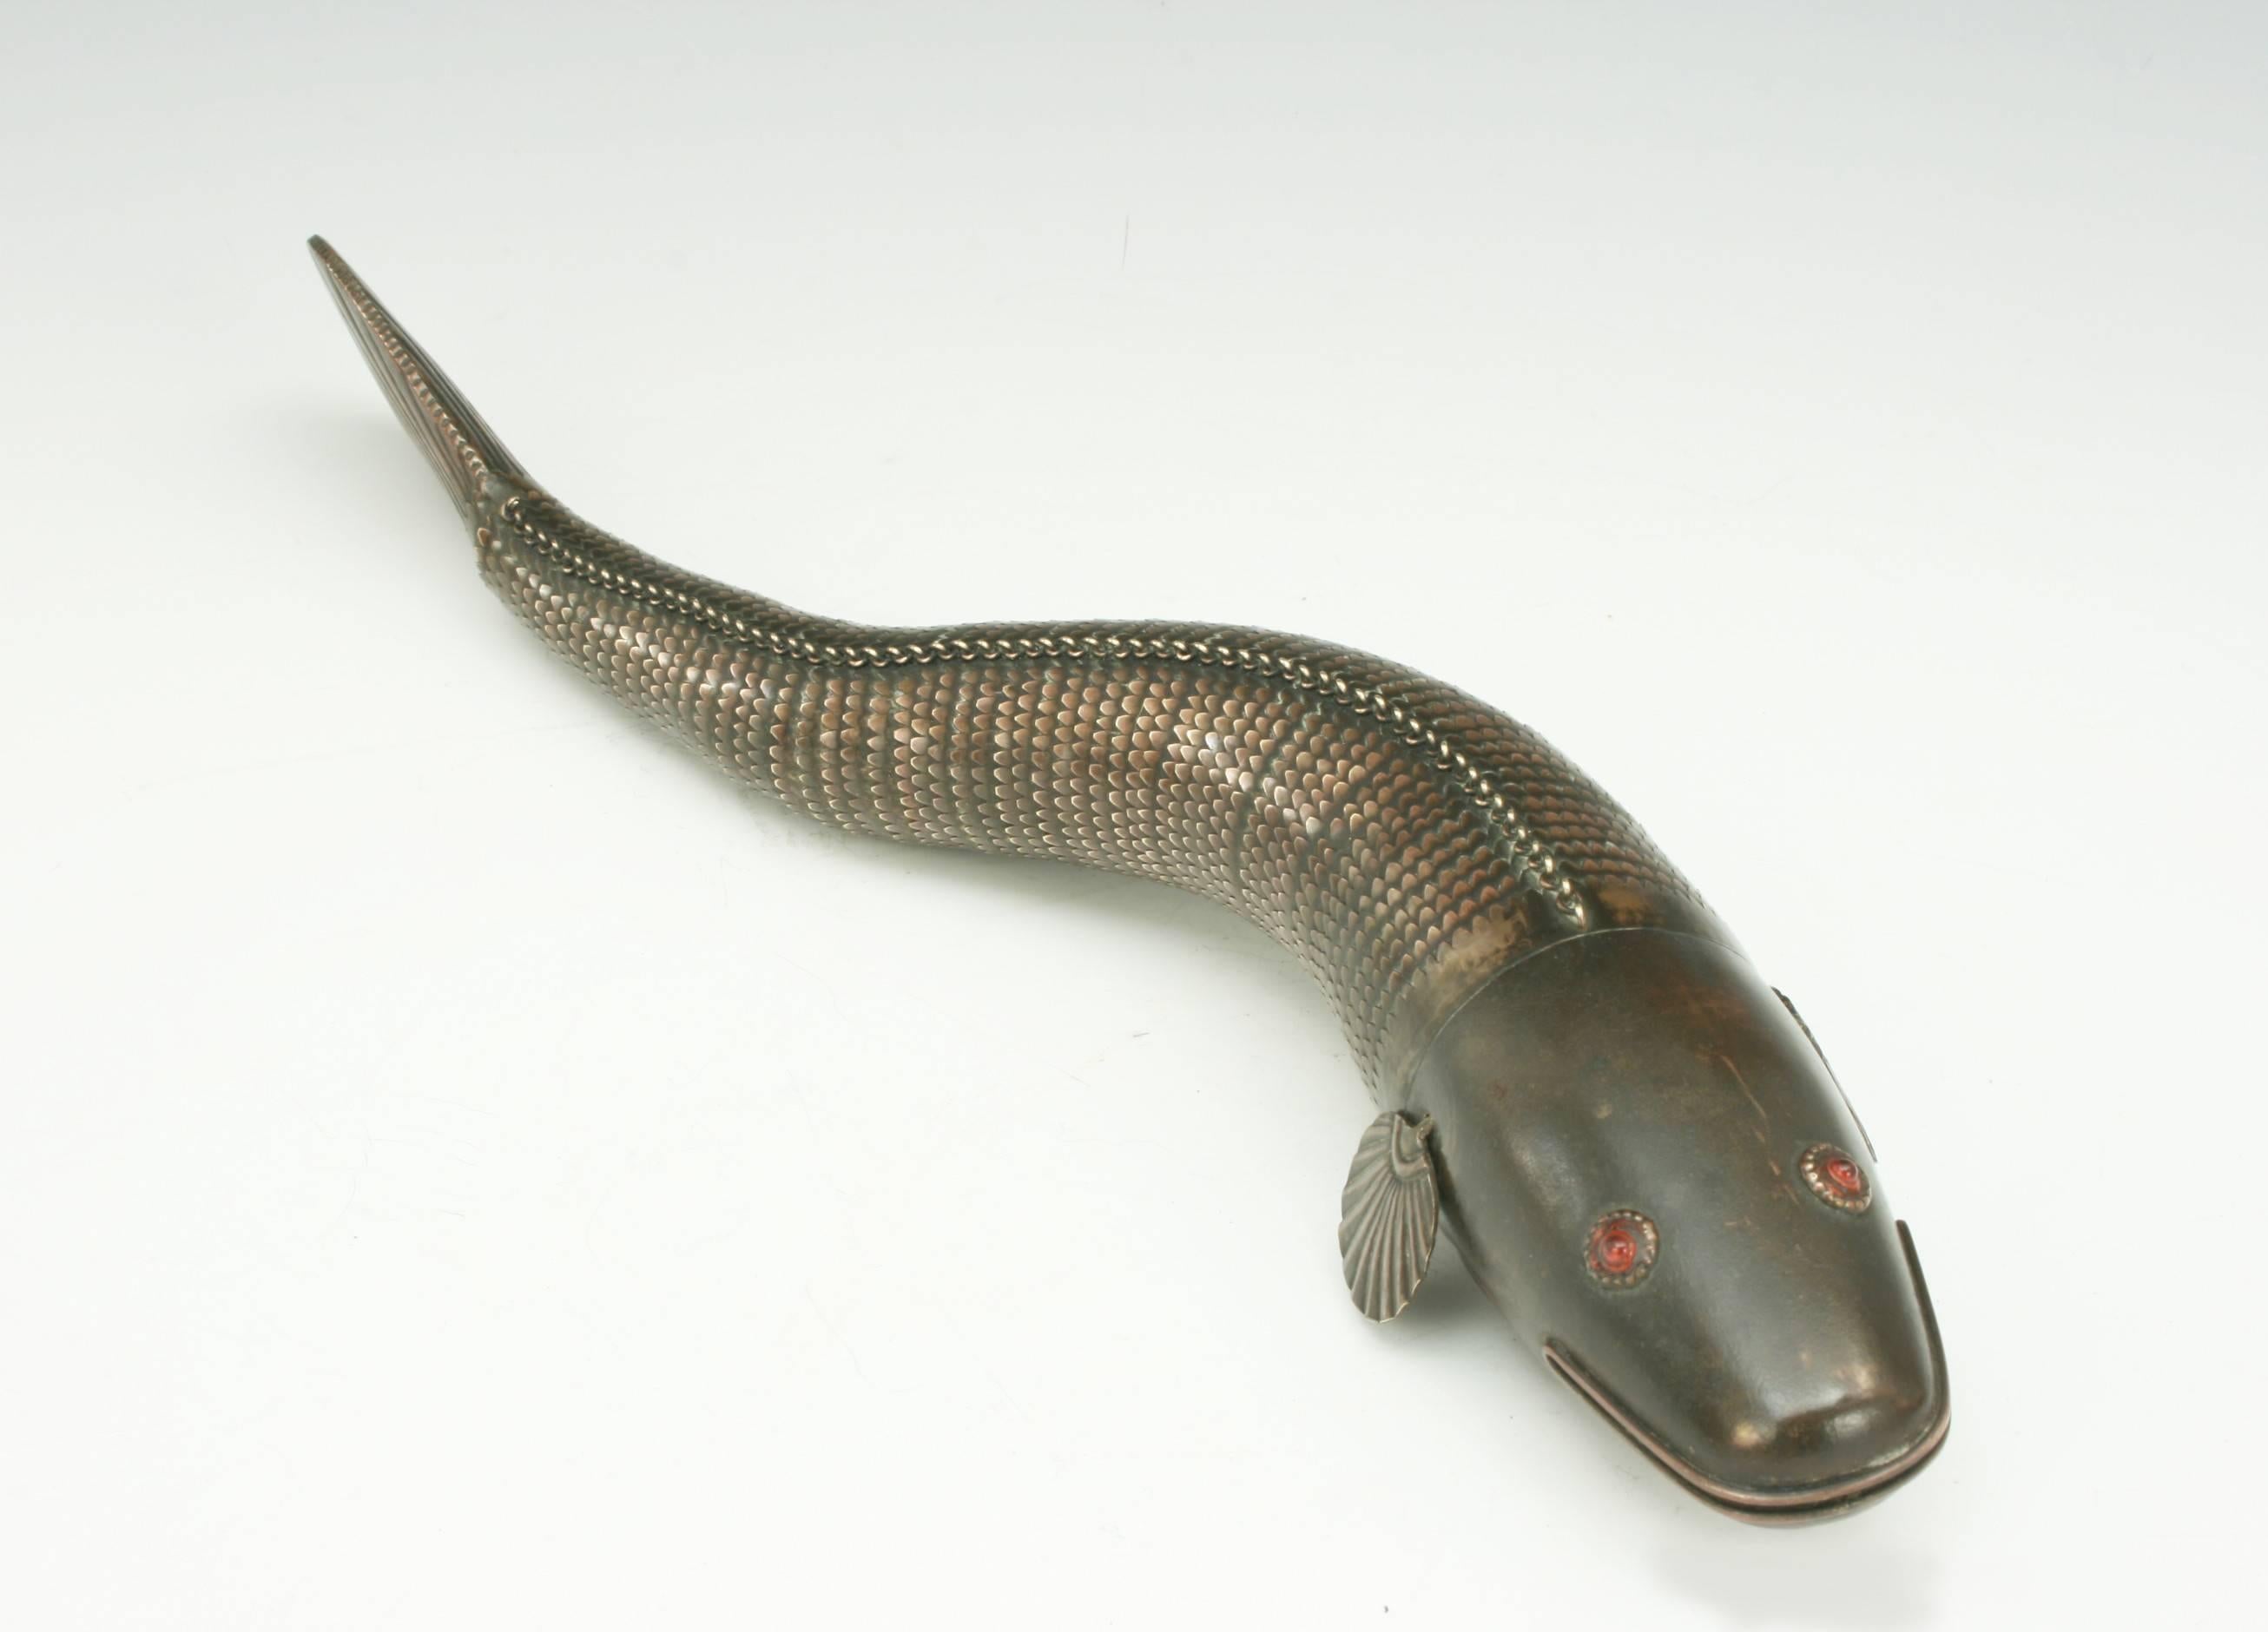 Fishing, Medina style articulated fish. 
A late 19th-early 20th century metal articulated Medina fish. The fish is made of brass with a wonderful patina. The head is with red eyes and fins, connected to an articulated body with a tail fin. The fish